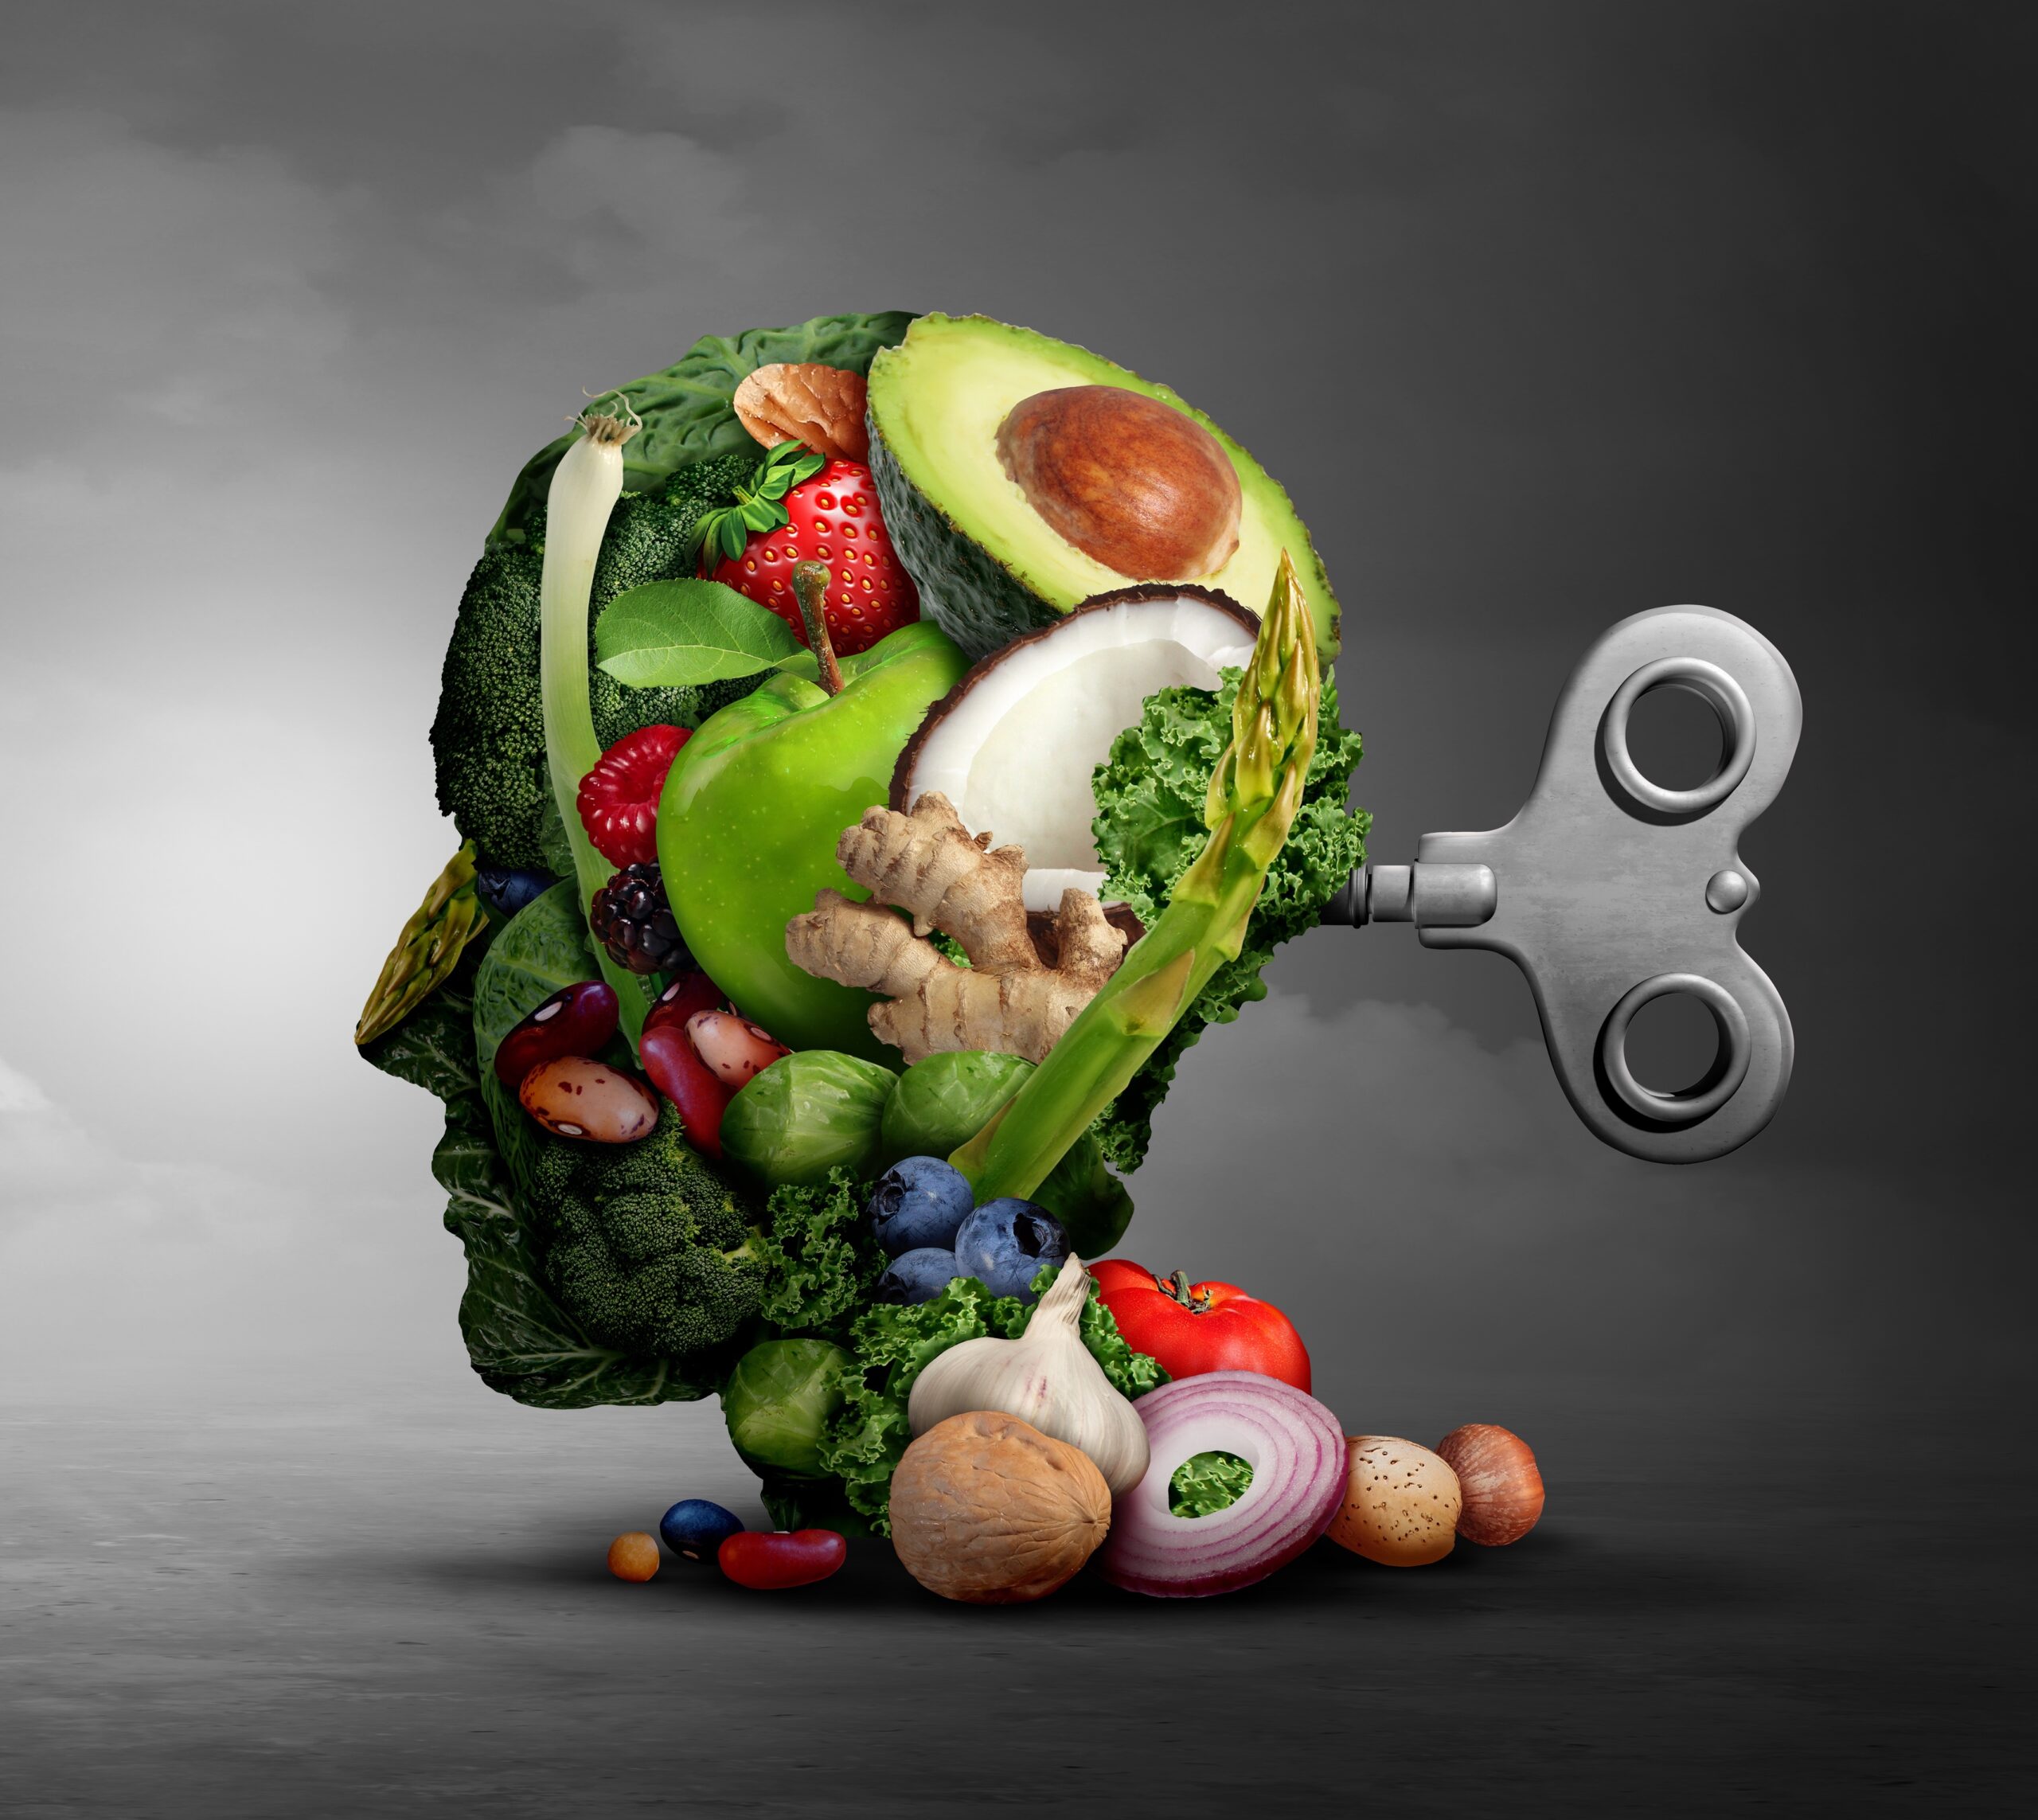 Vegan diet and mental function concept as a psychiatric or psychiatry symbol of the effects on the brain  and mood by eating plant based food with 3D illustration elements.